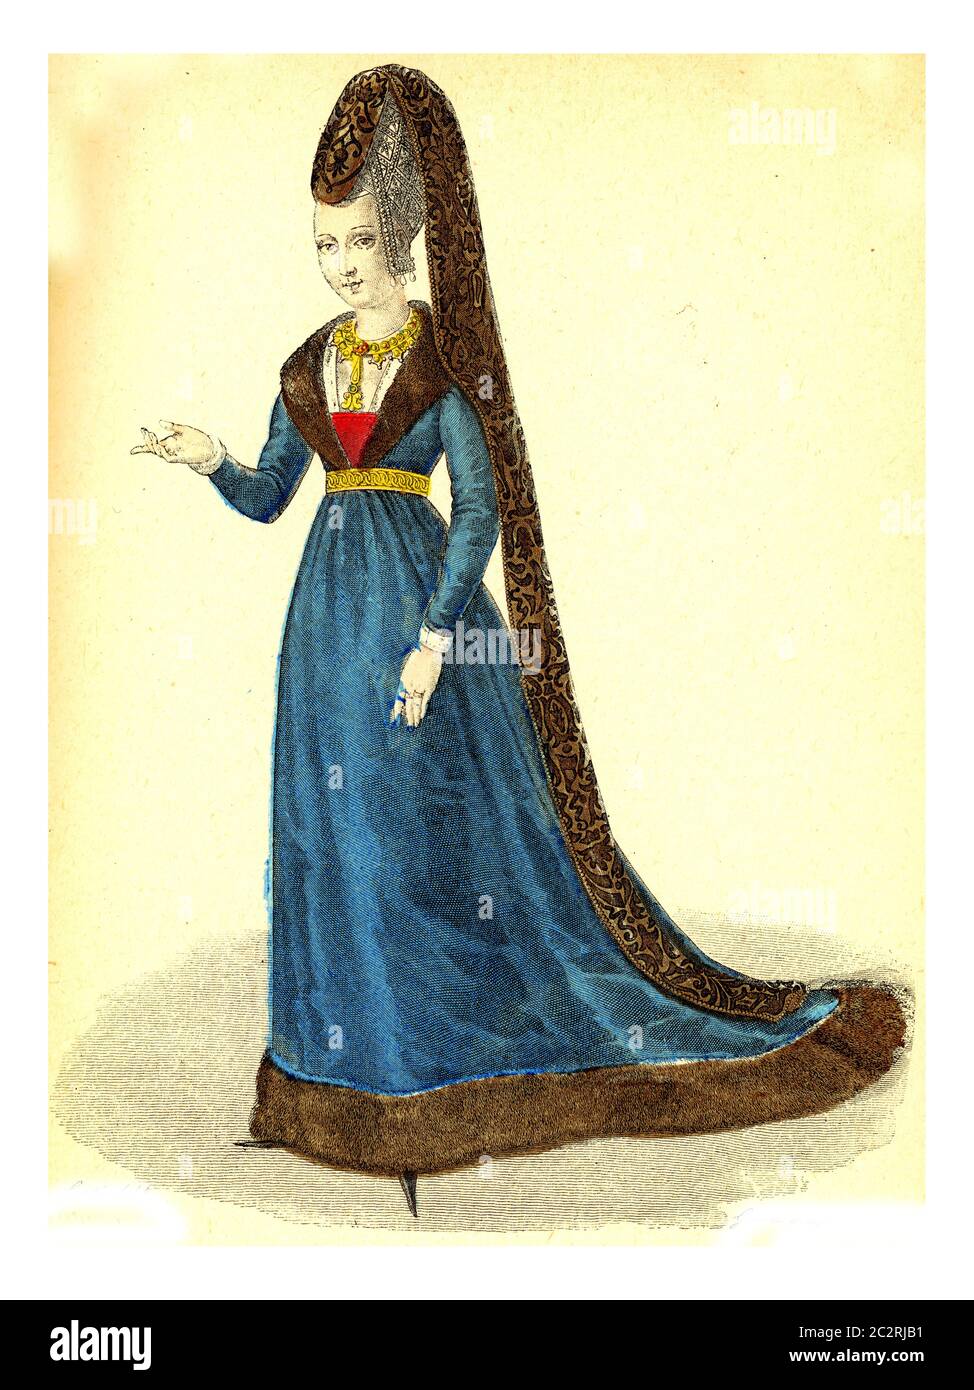 Agnes Sorel, vintage engraved illustration. 12th to 18th century Fashion By Image Stock Photo